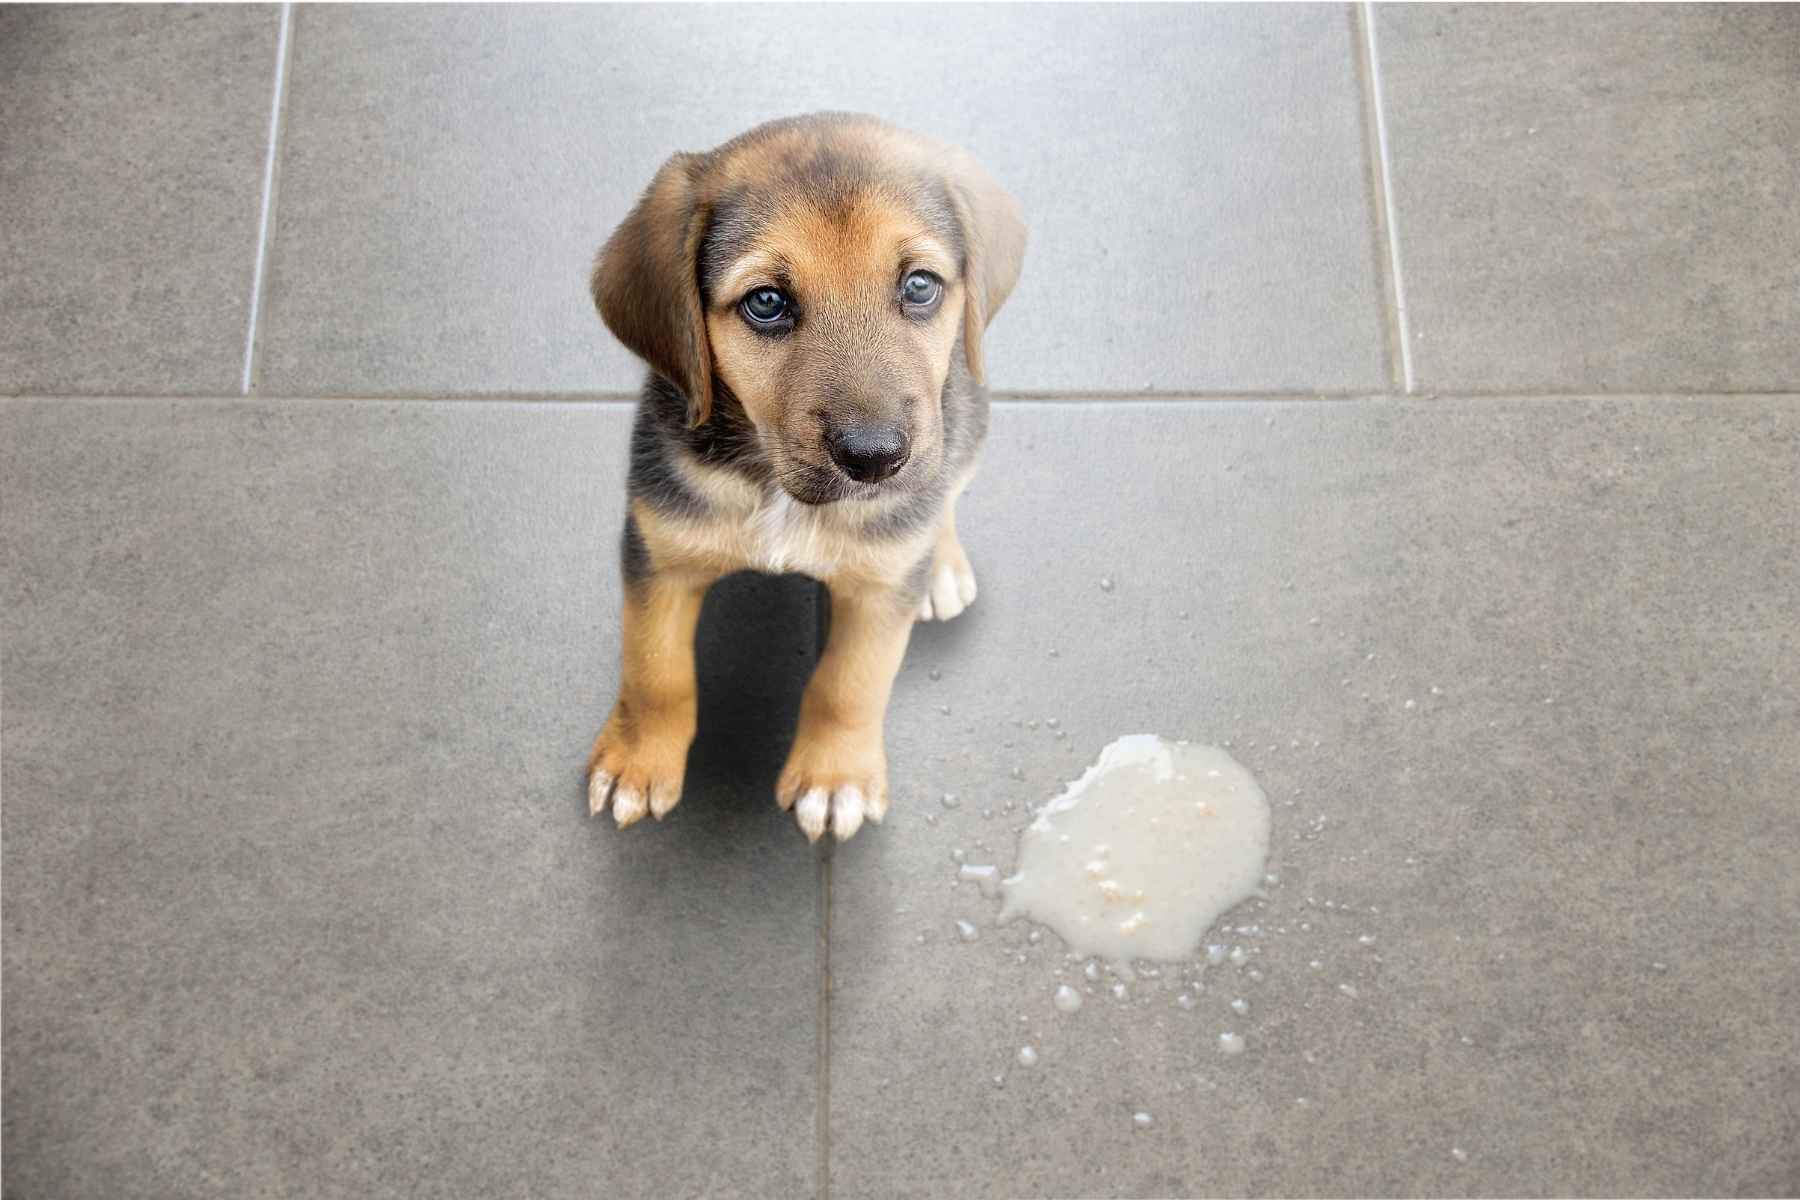 Cute puppy has thrown up on the floor